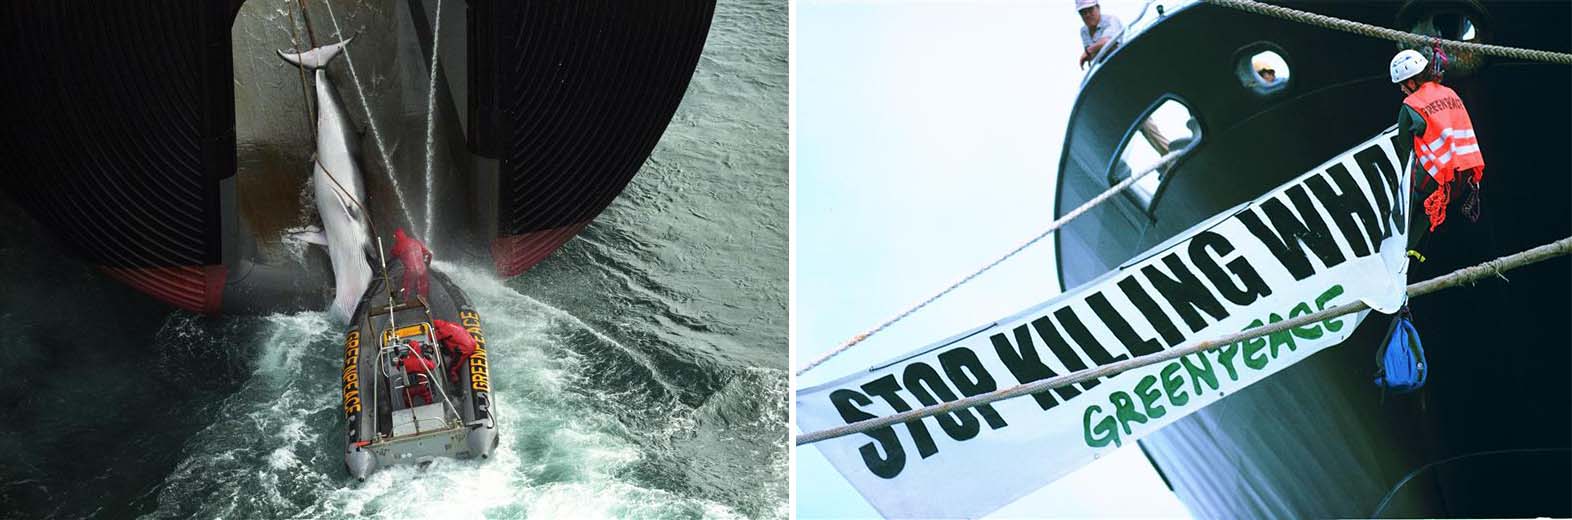 Greenpeace campaigning against whaling